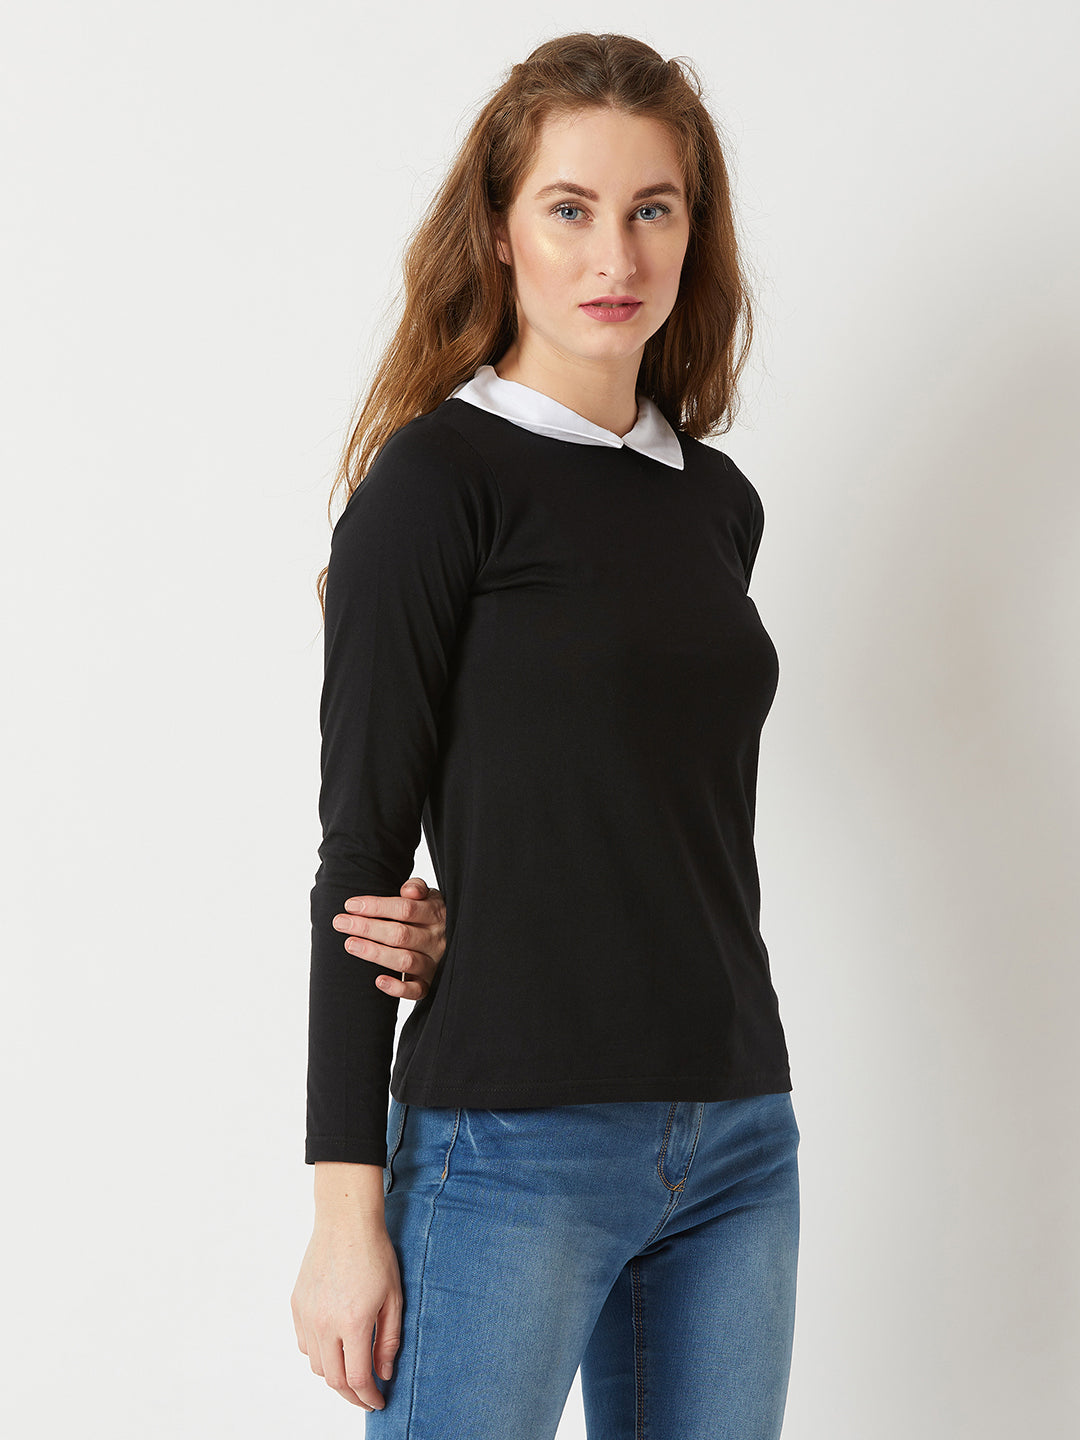 Women's Black Collared Round Neck Full Sleeve Cotton Solid Buttoned Top